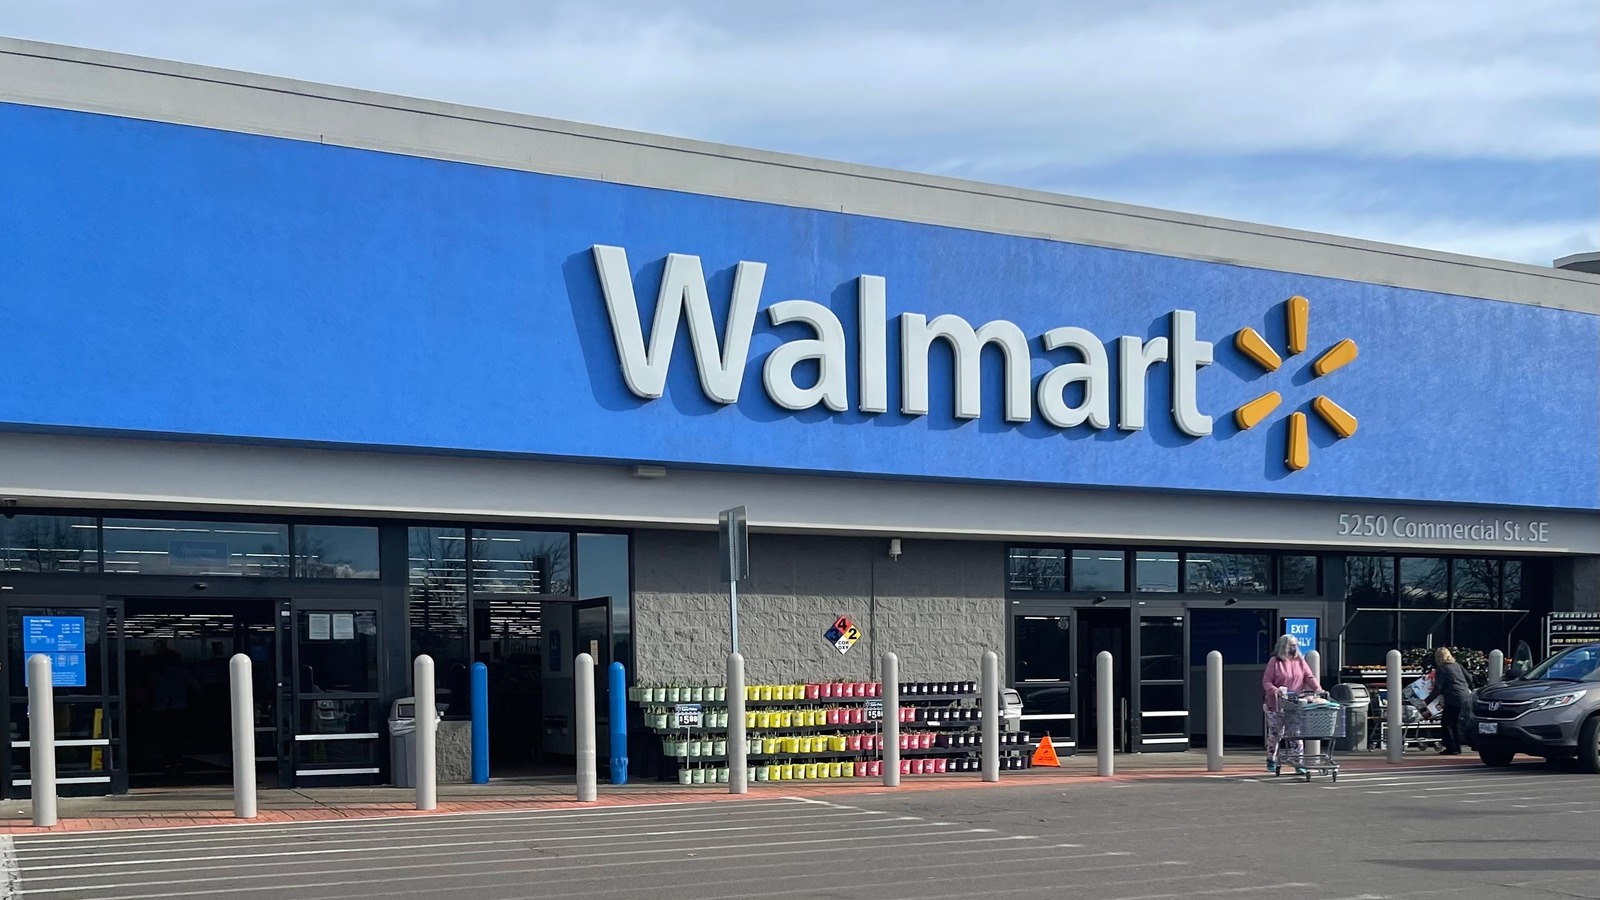 15 Great Value Foods You Should Absolutely Buy From Walmart 